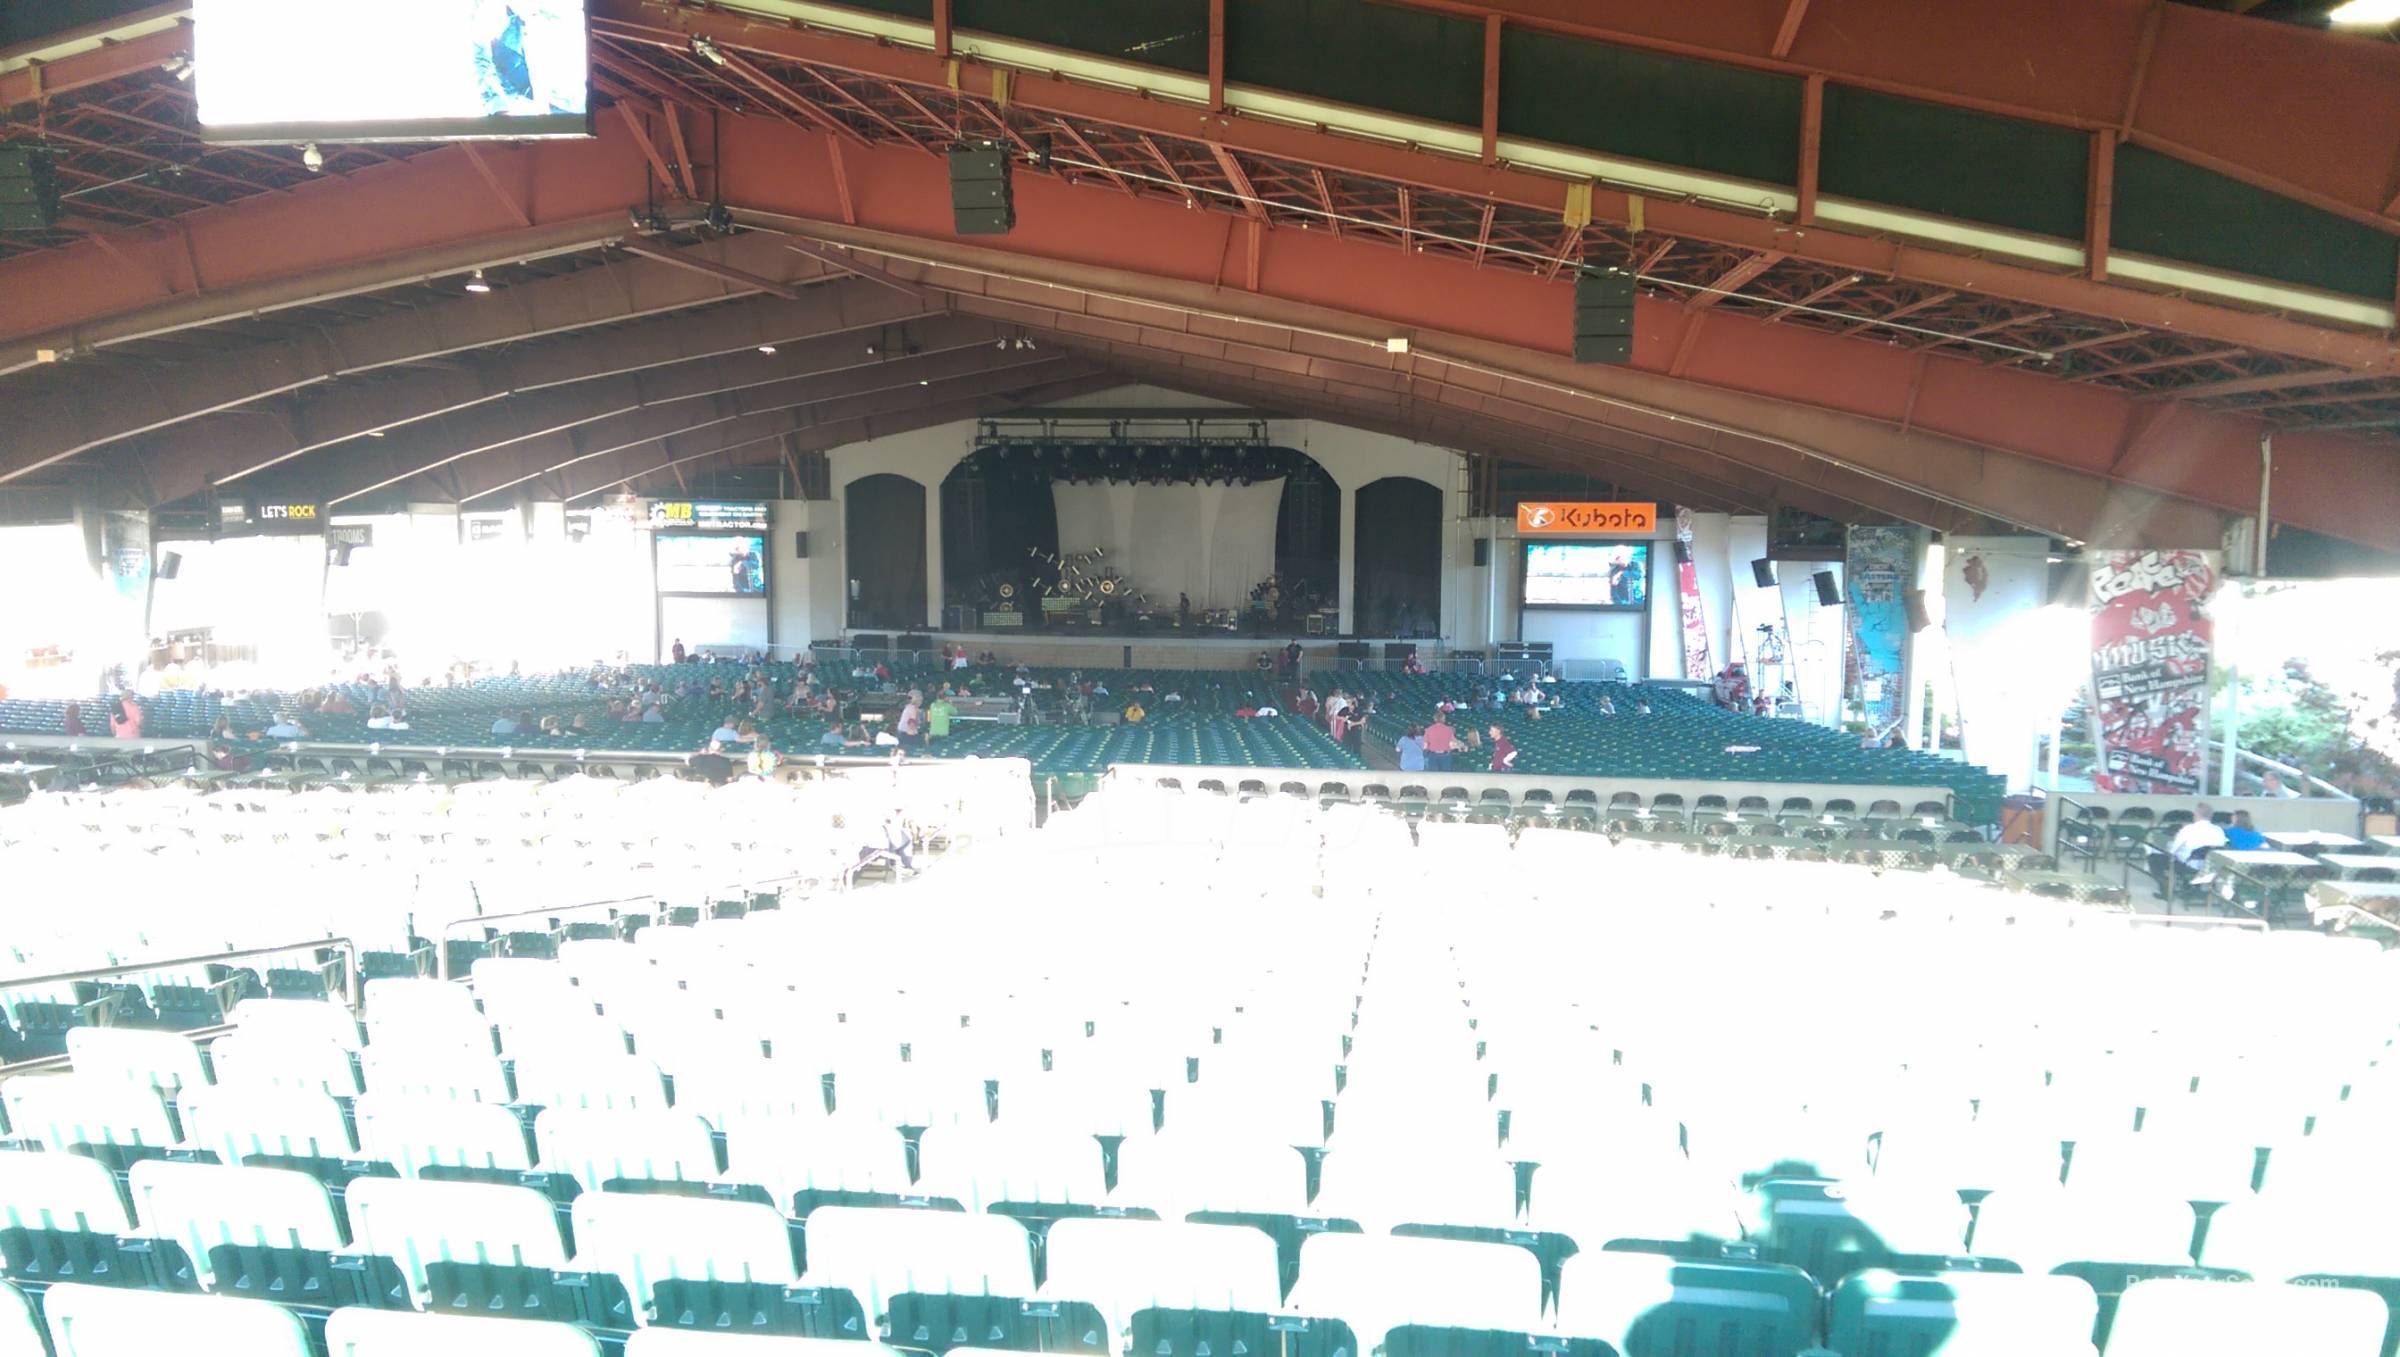 section 3d, row 20 seat view  - bank of new hampshire pavilion